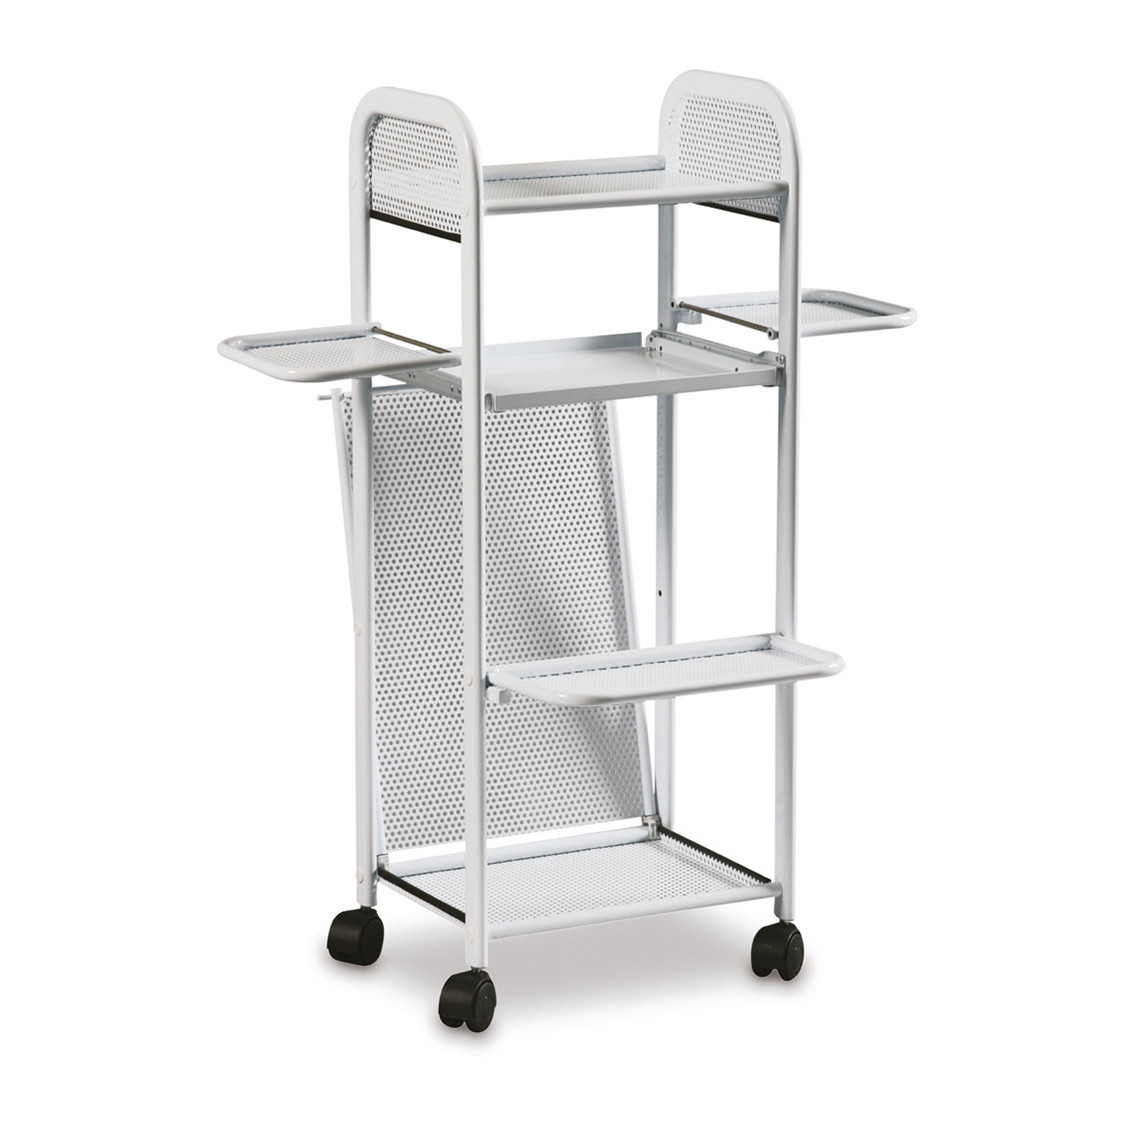 Grill trolley for wax